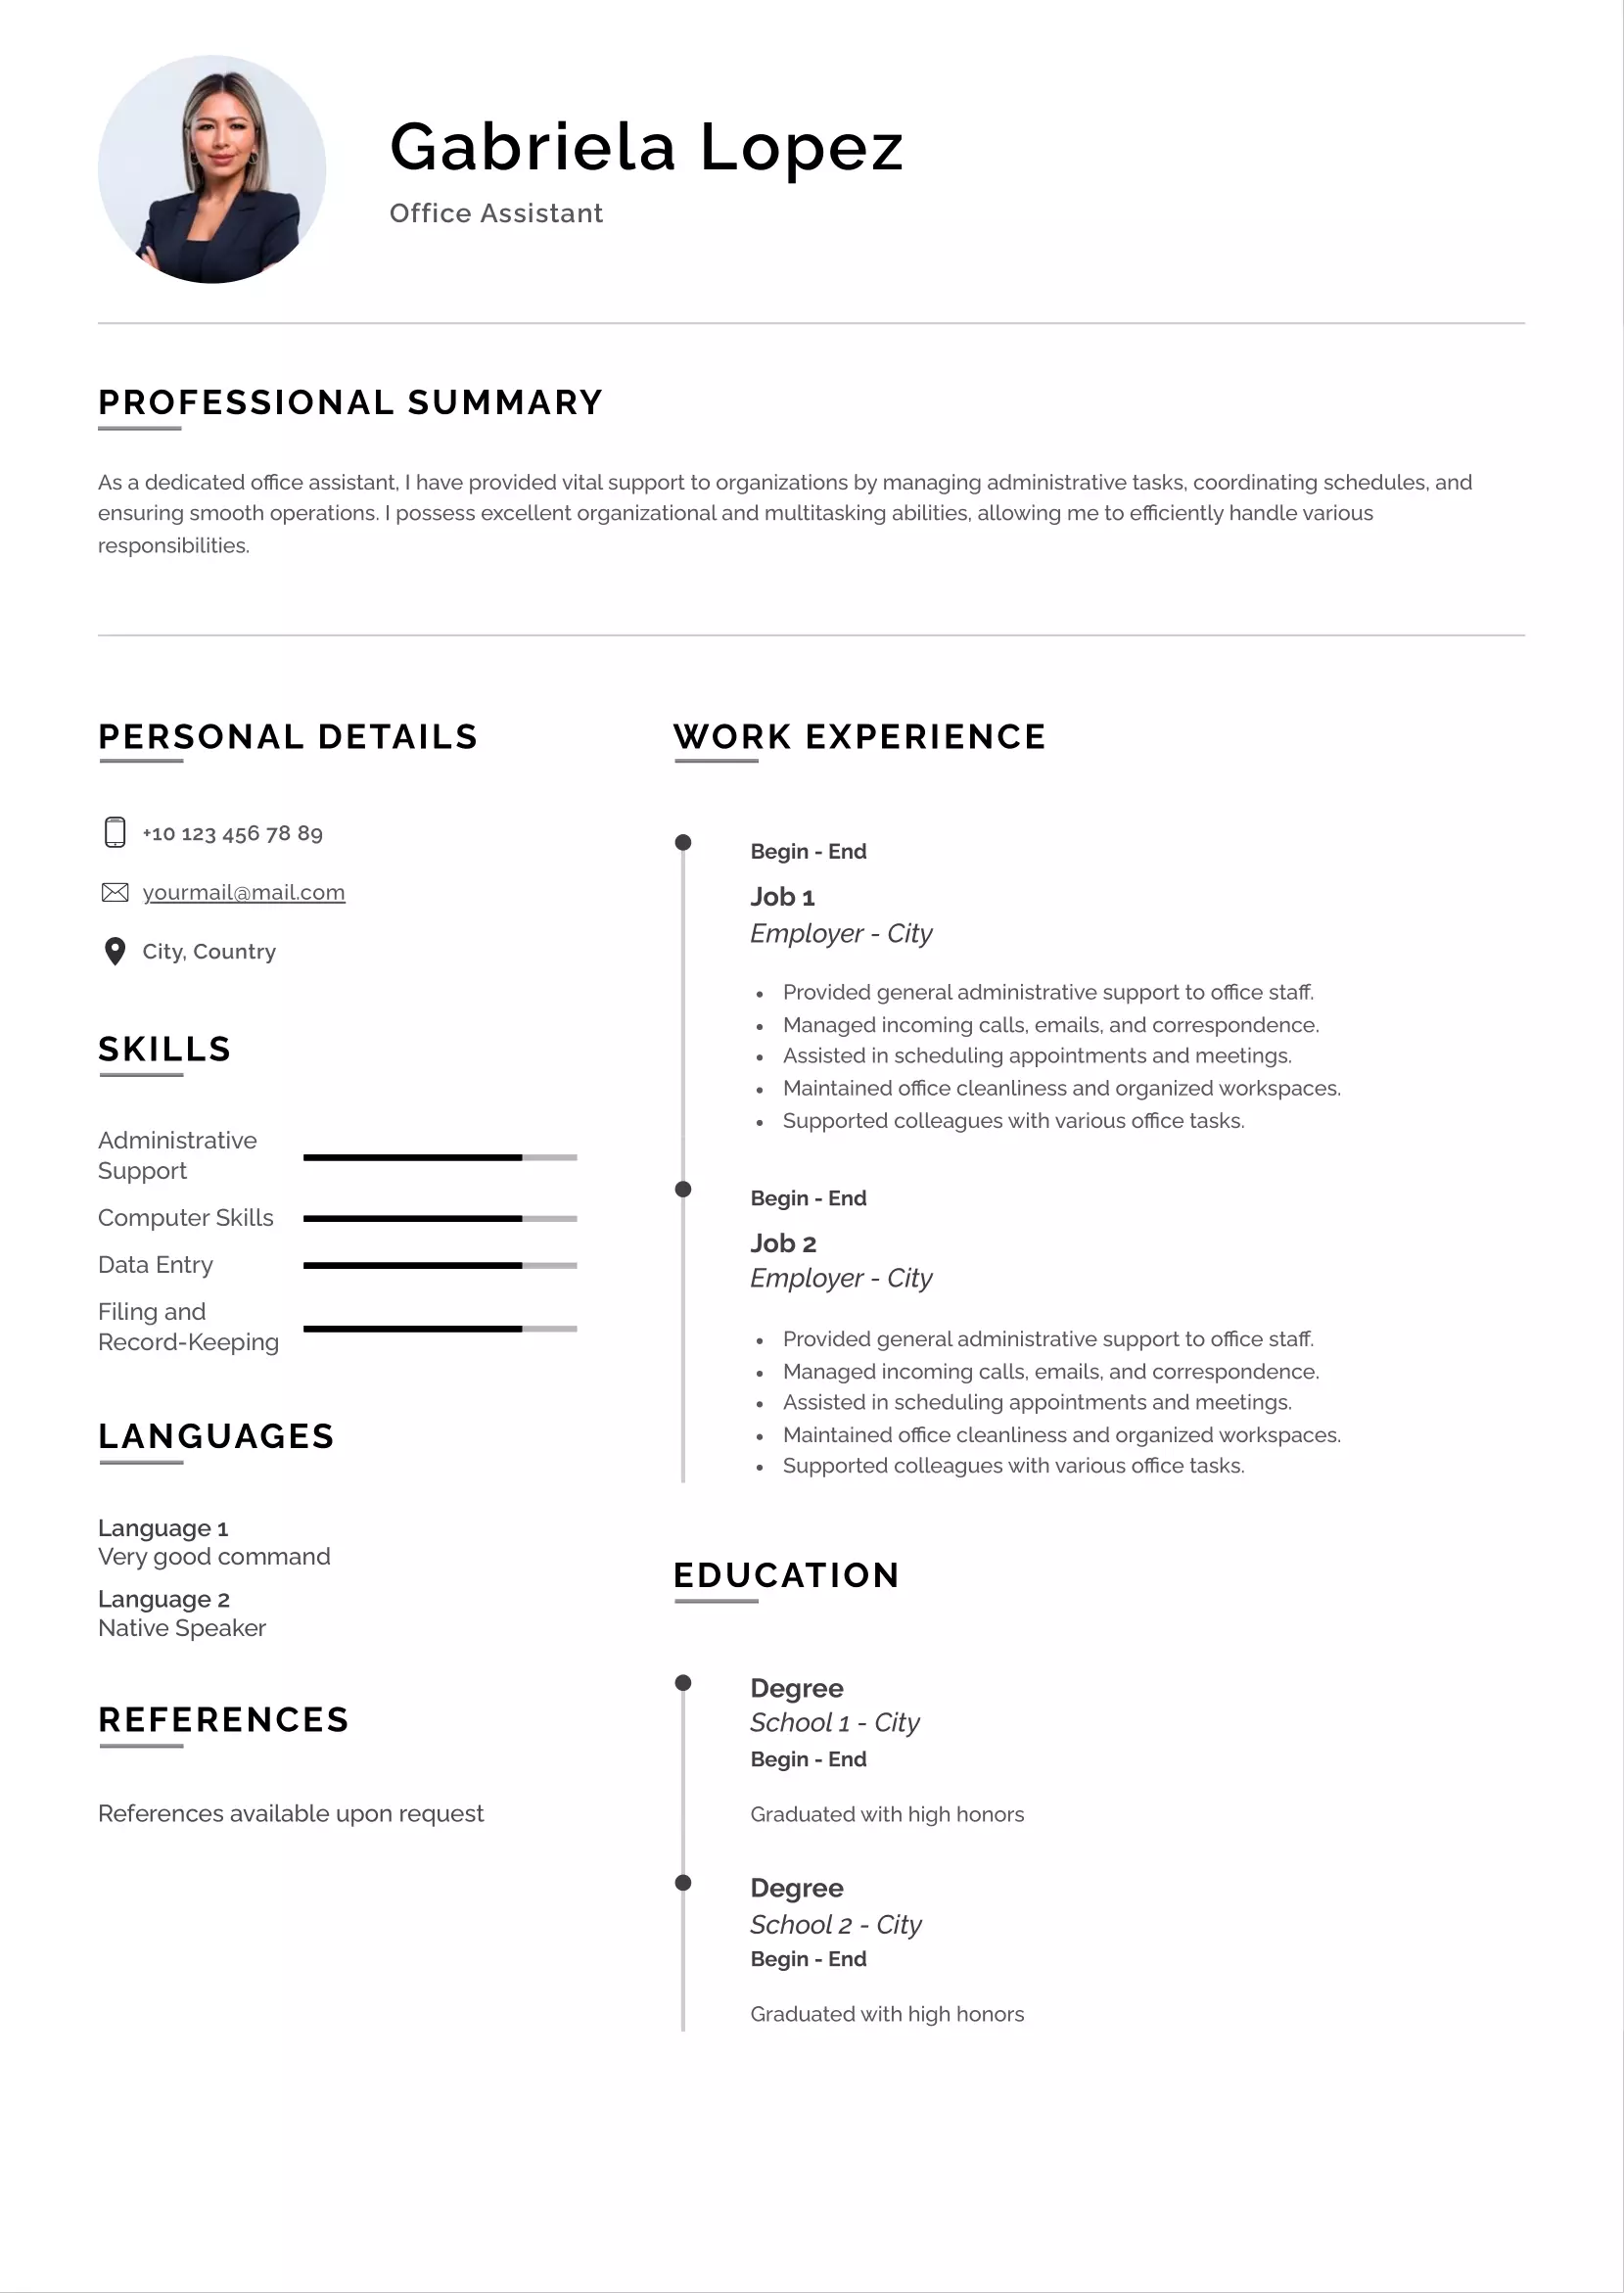 Office assistant resume CV